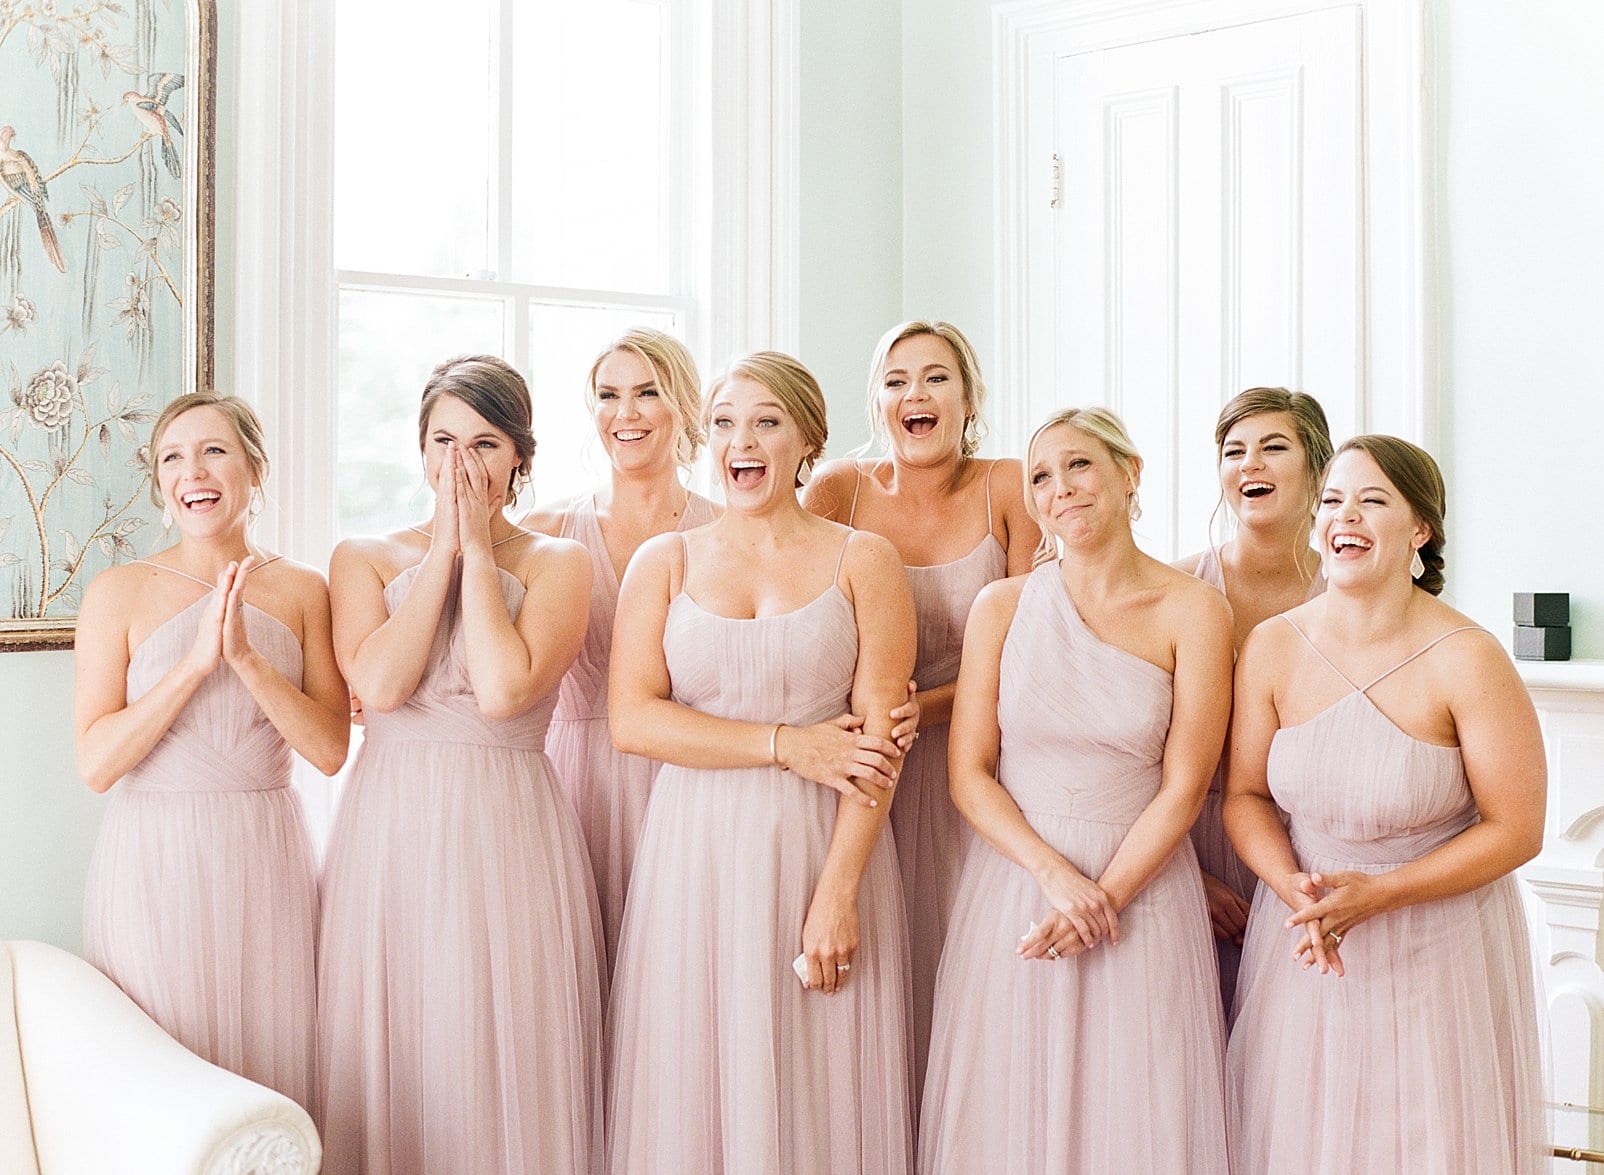 Merrimon Wynne bridesmaids in long light pink gowns seeing the bride dressed for the first time photo